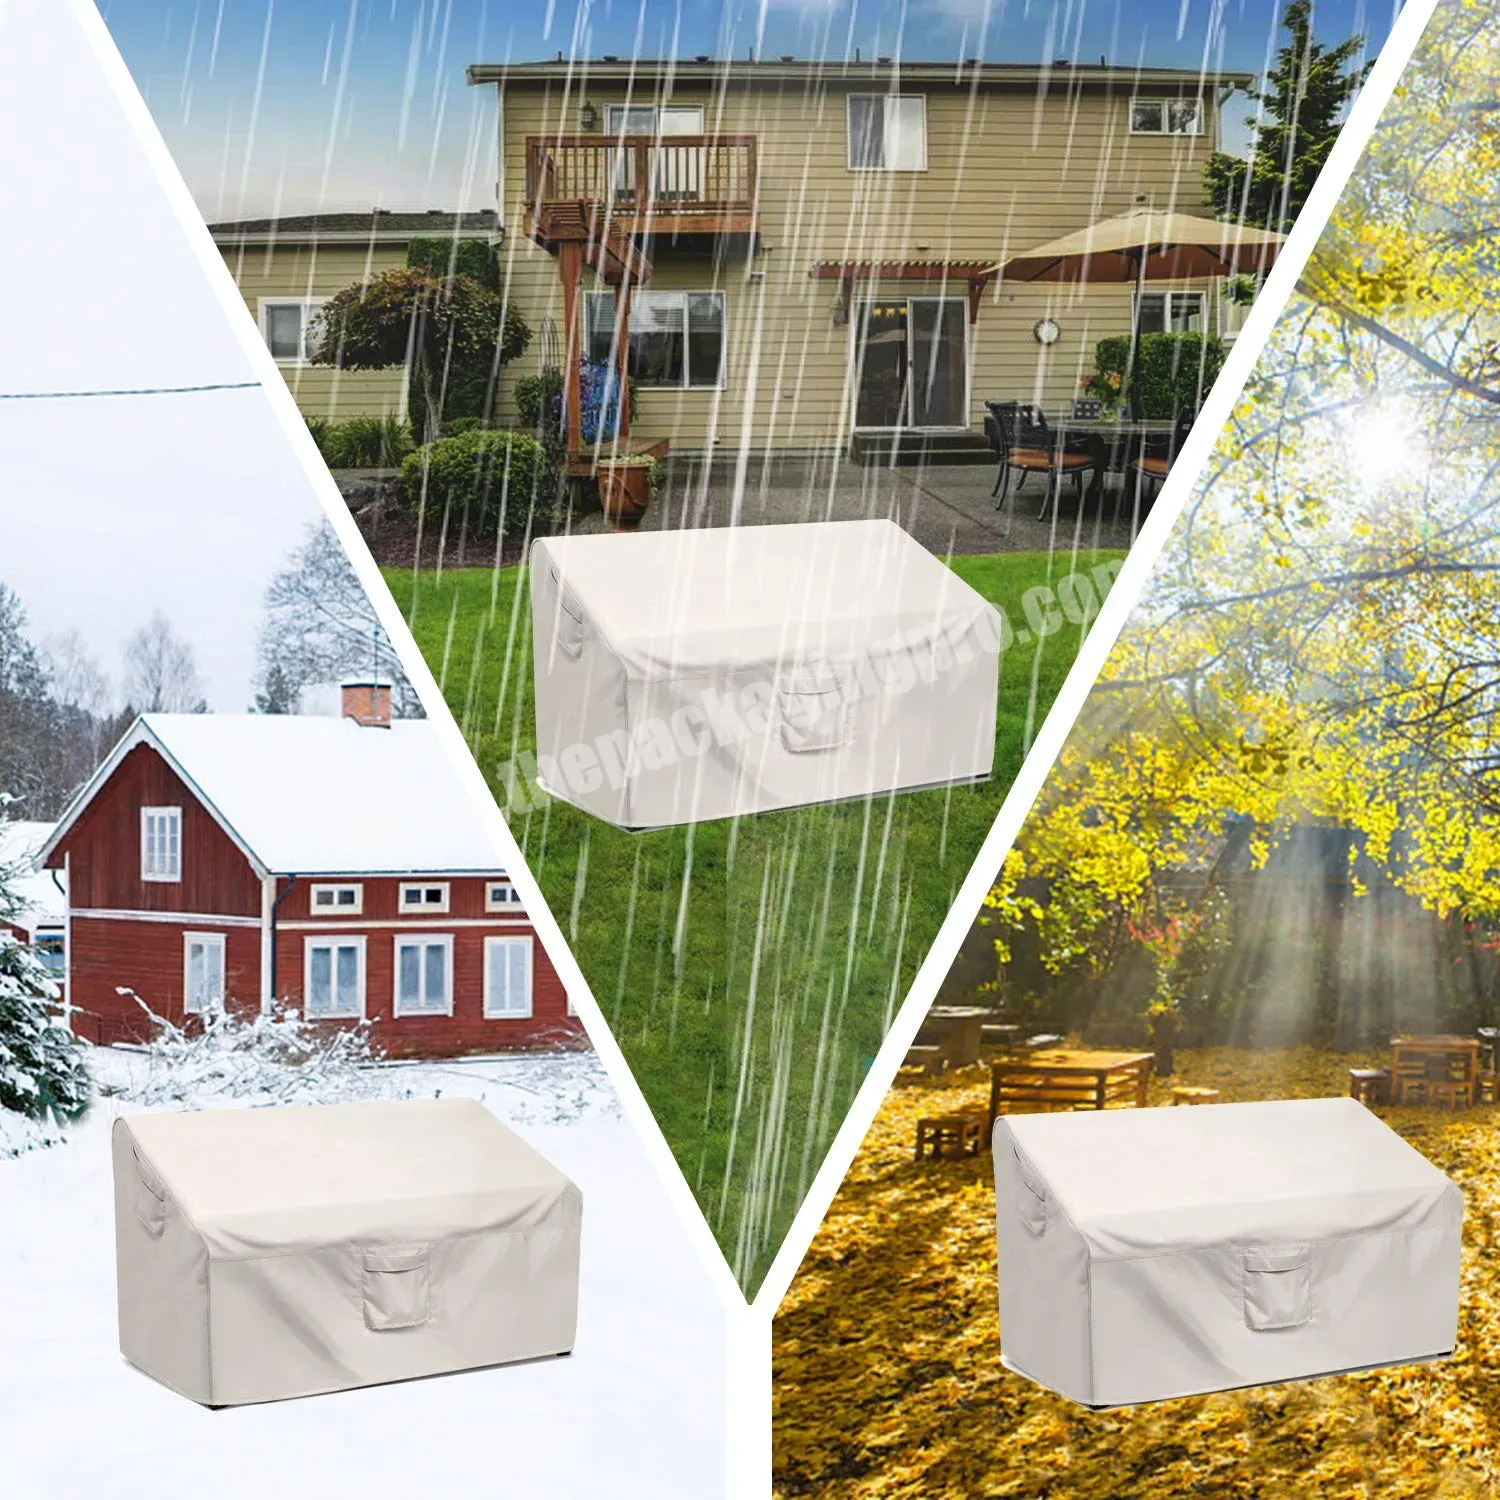 Patio Furniture Covers Oem Outdoor Furniture Cover Waterproof 600d Tough Oxford Durable Cover For Sofa And Seats - Buy Patio Furniture Covers,Outdoor Furniture Cover,Waterproof 600d Tough Oxford Durable Cover For Sofa And Seats.